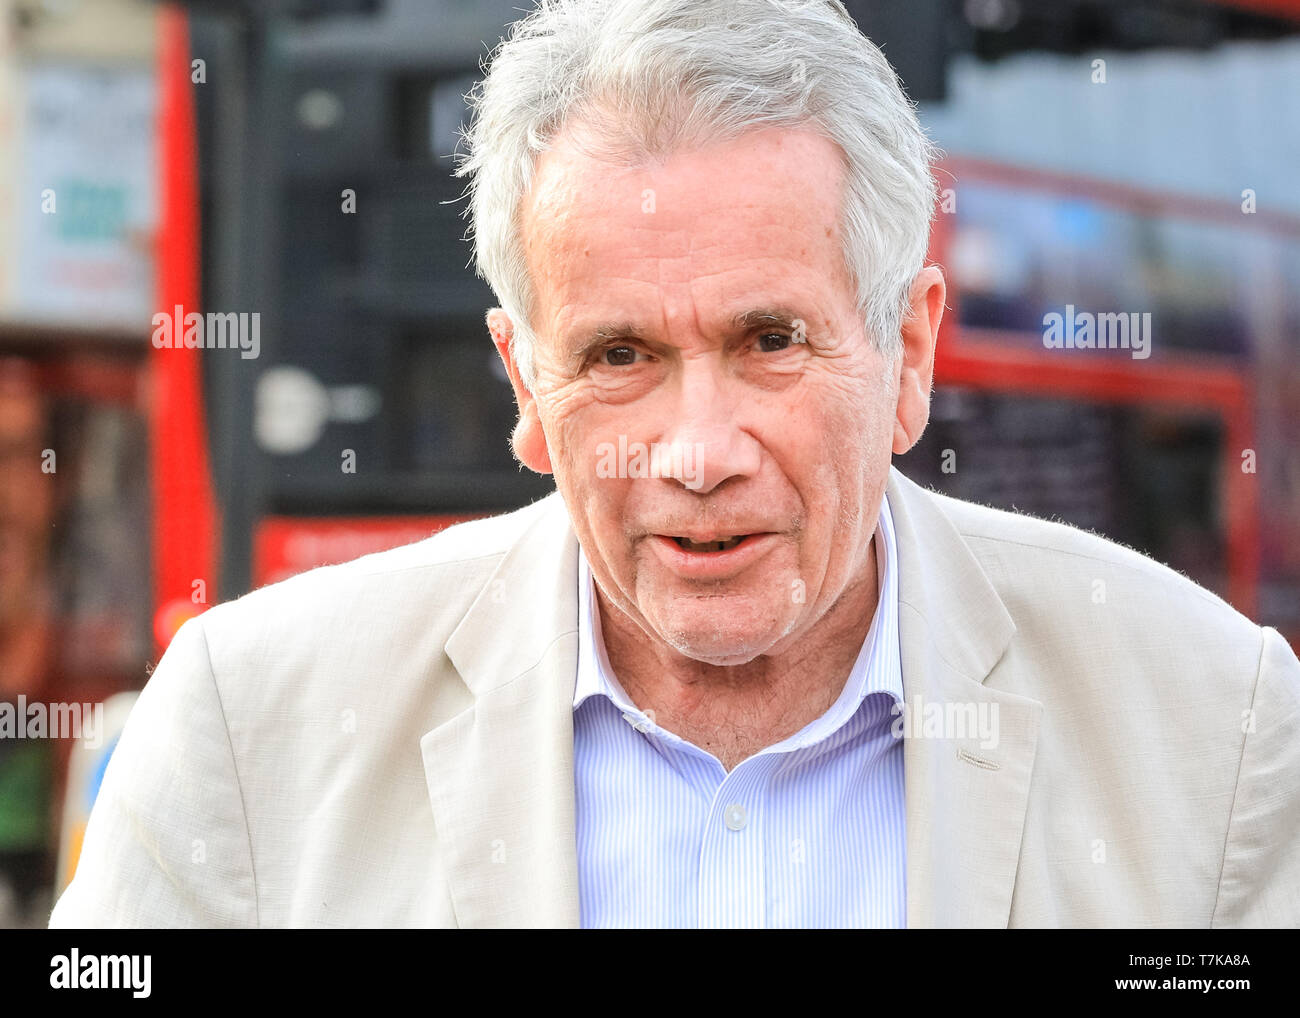 Golders Green, London, UK, 07th May 2019. Veteran war correspondent and former independent MP Martin Bell, often known as 'the man in the white suit',  chats to old friend Gavin Esler and expresses his support. MP Luciana Berger, MEP Candidate (and former broadcaster) Gavin Esler, and several of the party's London MEP candidates hand out flyers on a street to promote the Change UK (The Independent Group) party near Golders Green Underground Station in London. Credit: Imageplotter/Alamy Live News Stock Photo